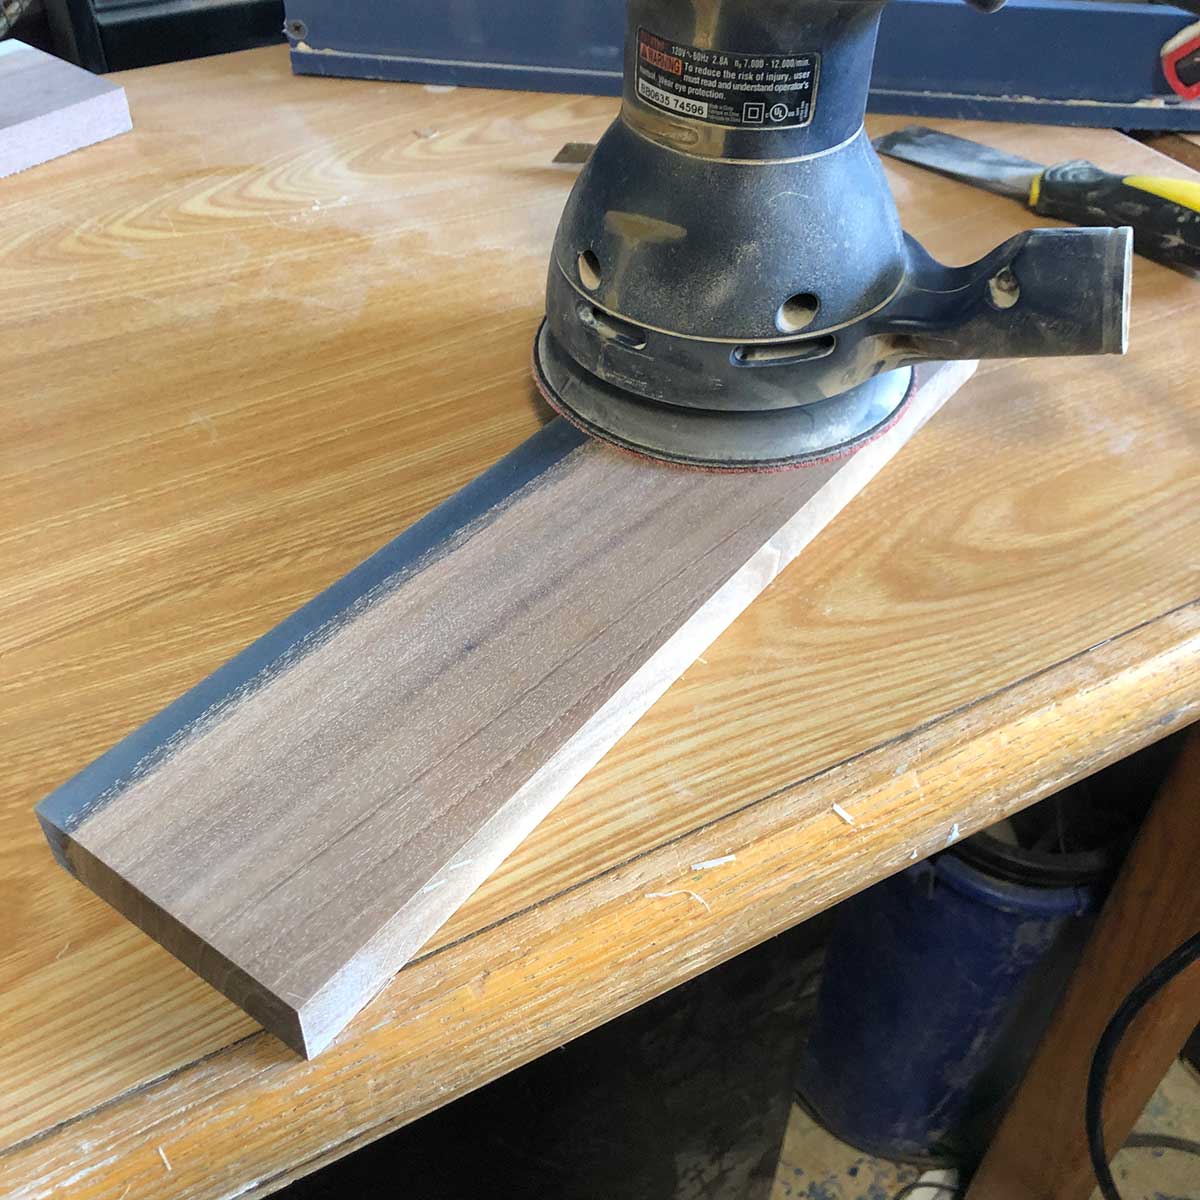 using an orbital palm sander to sand a wood and epoxy magnetic knife holder made from salvaged lumber and epoxy resin